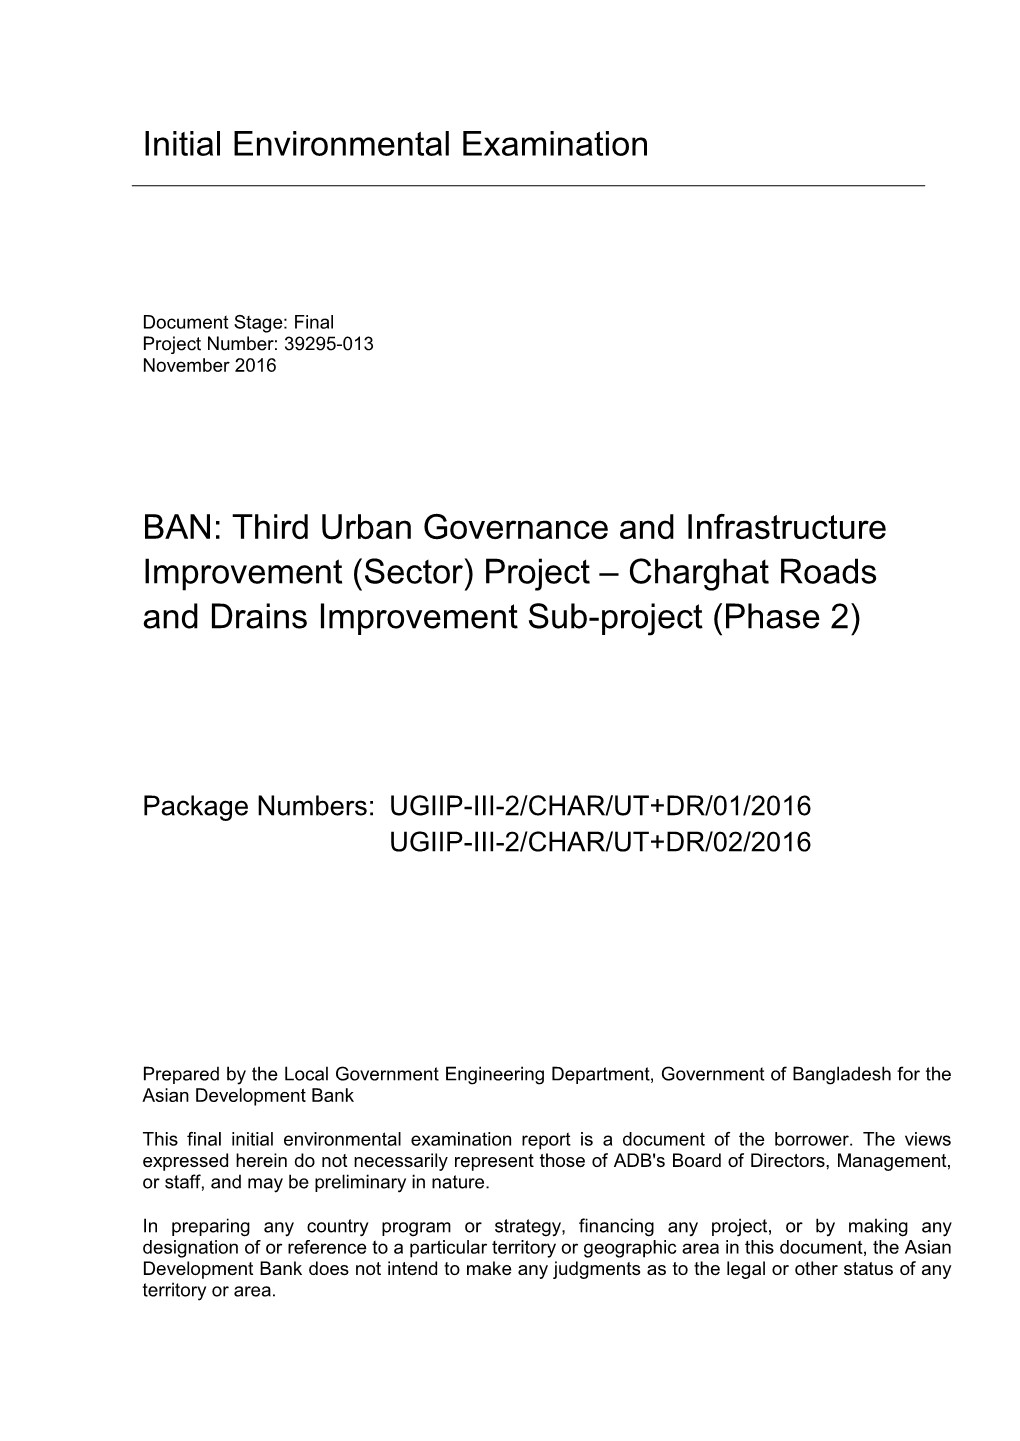 Initial Environmental Examination BAN: Third Urban Governance and Infrastructure Improvement (Sector) Project – Charghat Roads